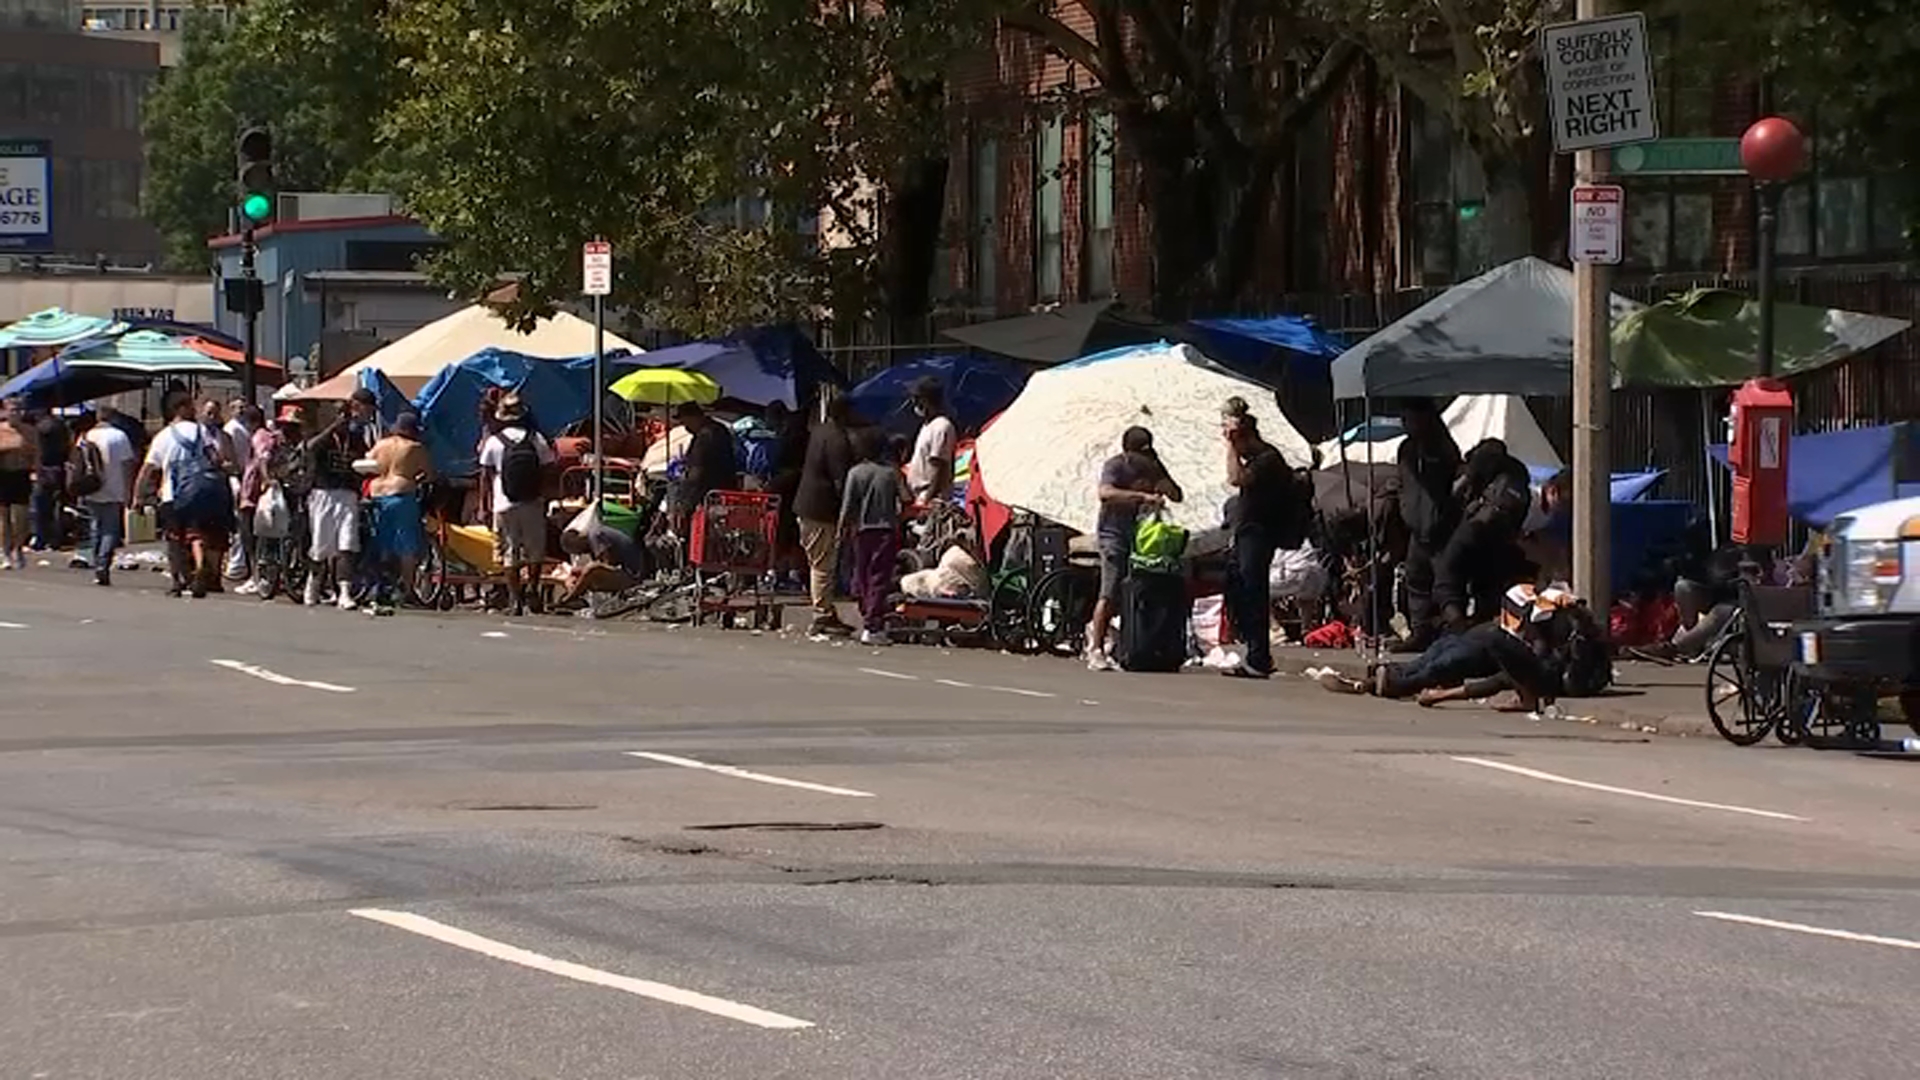 Boston’s Mass. and Cass Crowds, Tents and Drugs Return NBC Boston